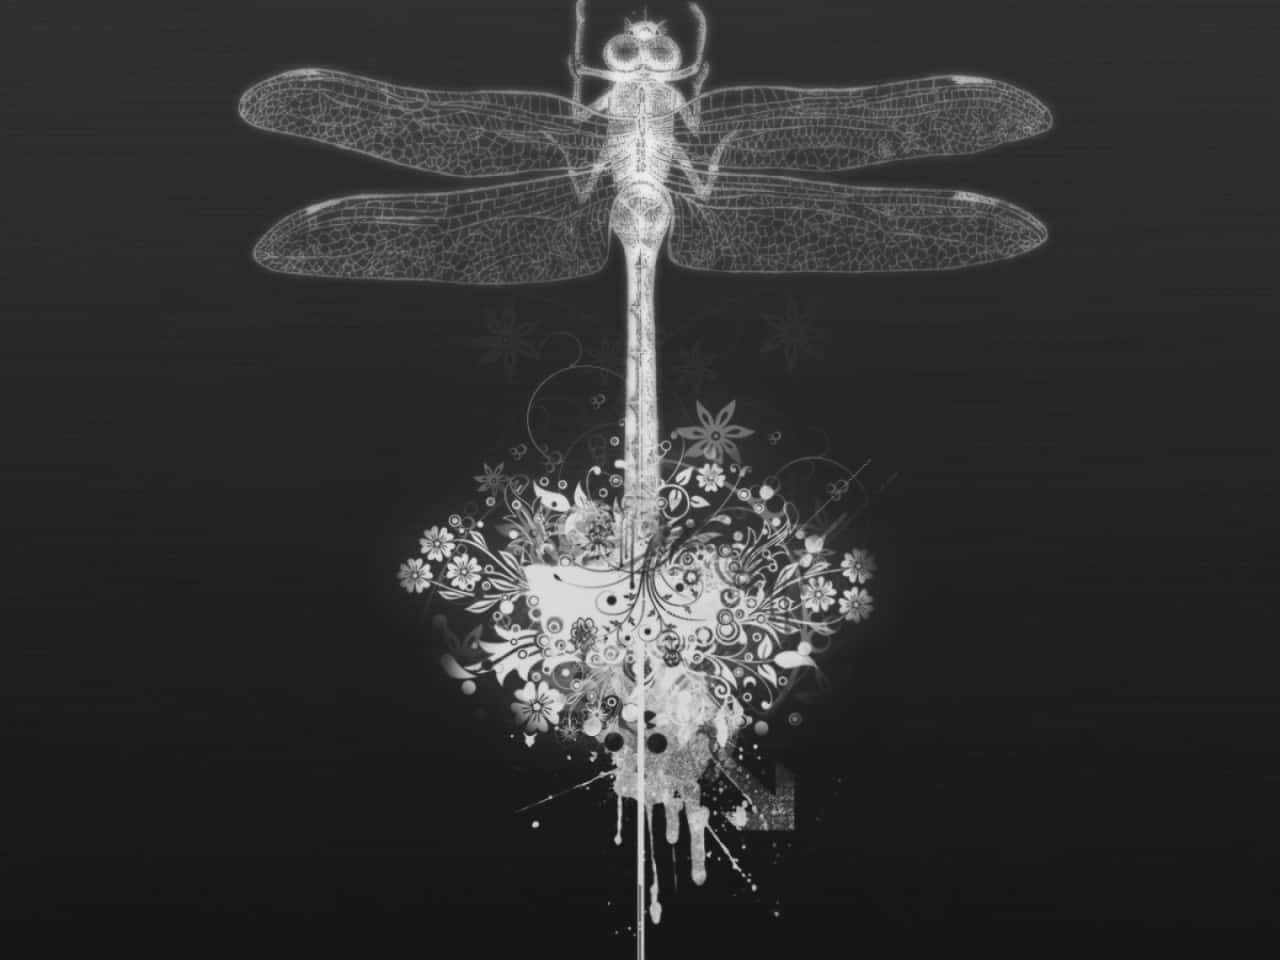 Dragonfly - X-ray - Black And White Wallpaper